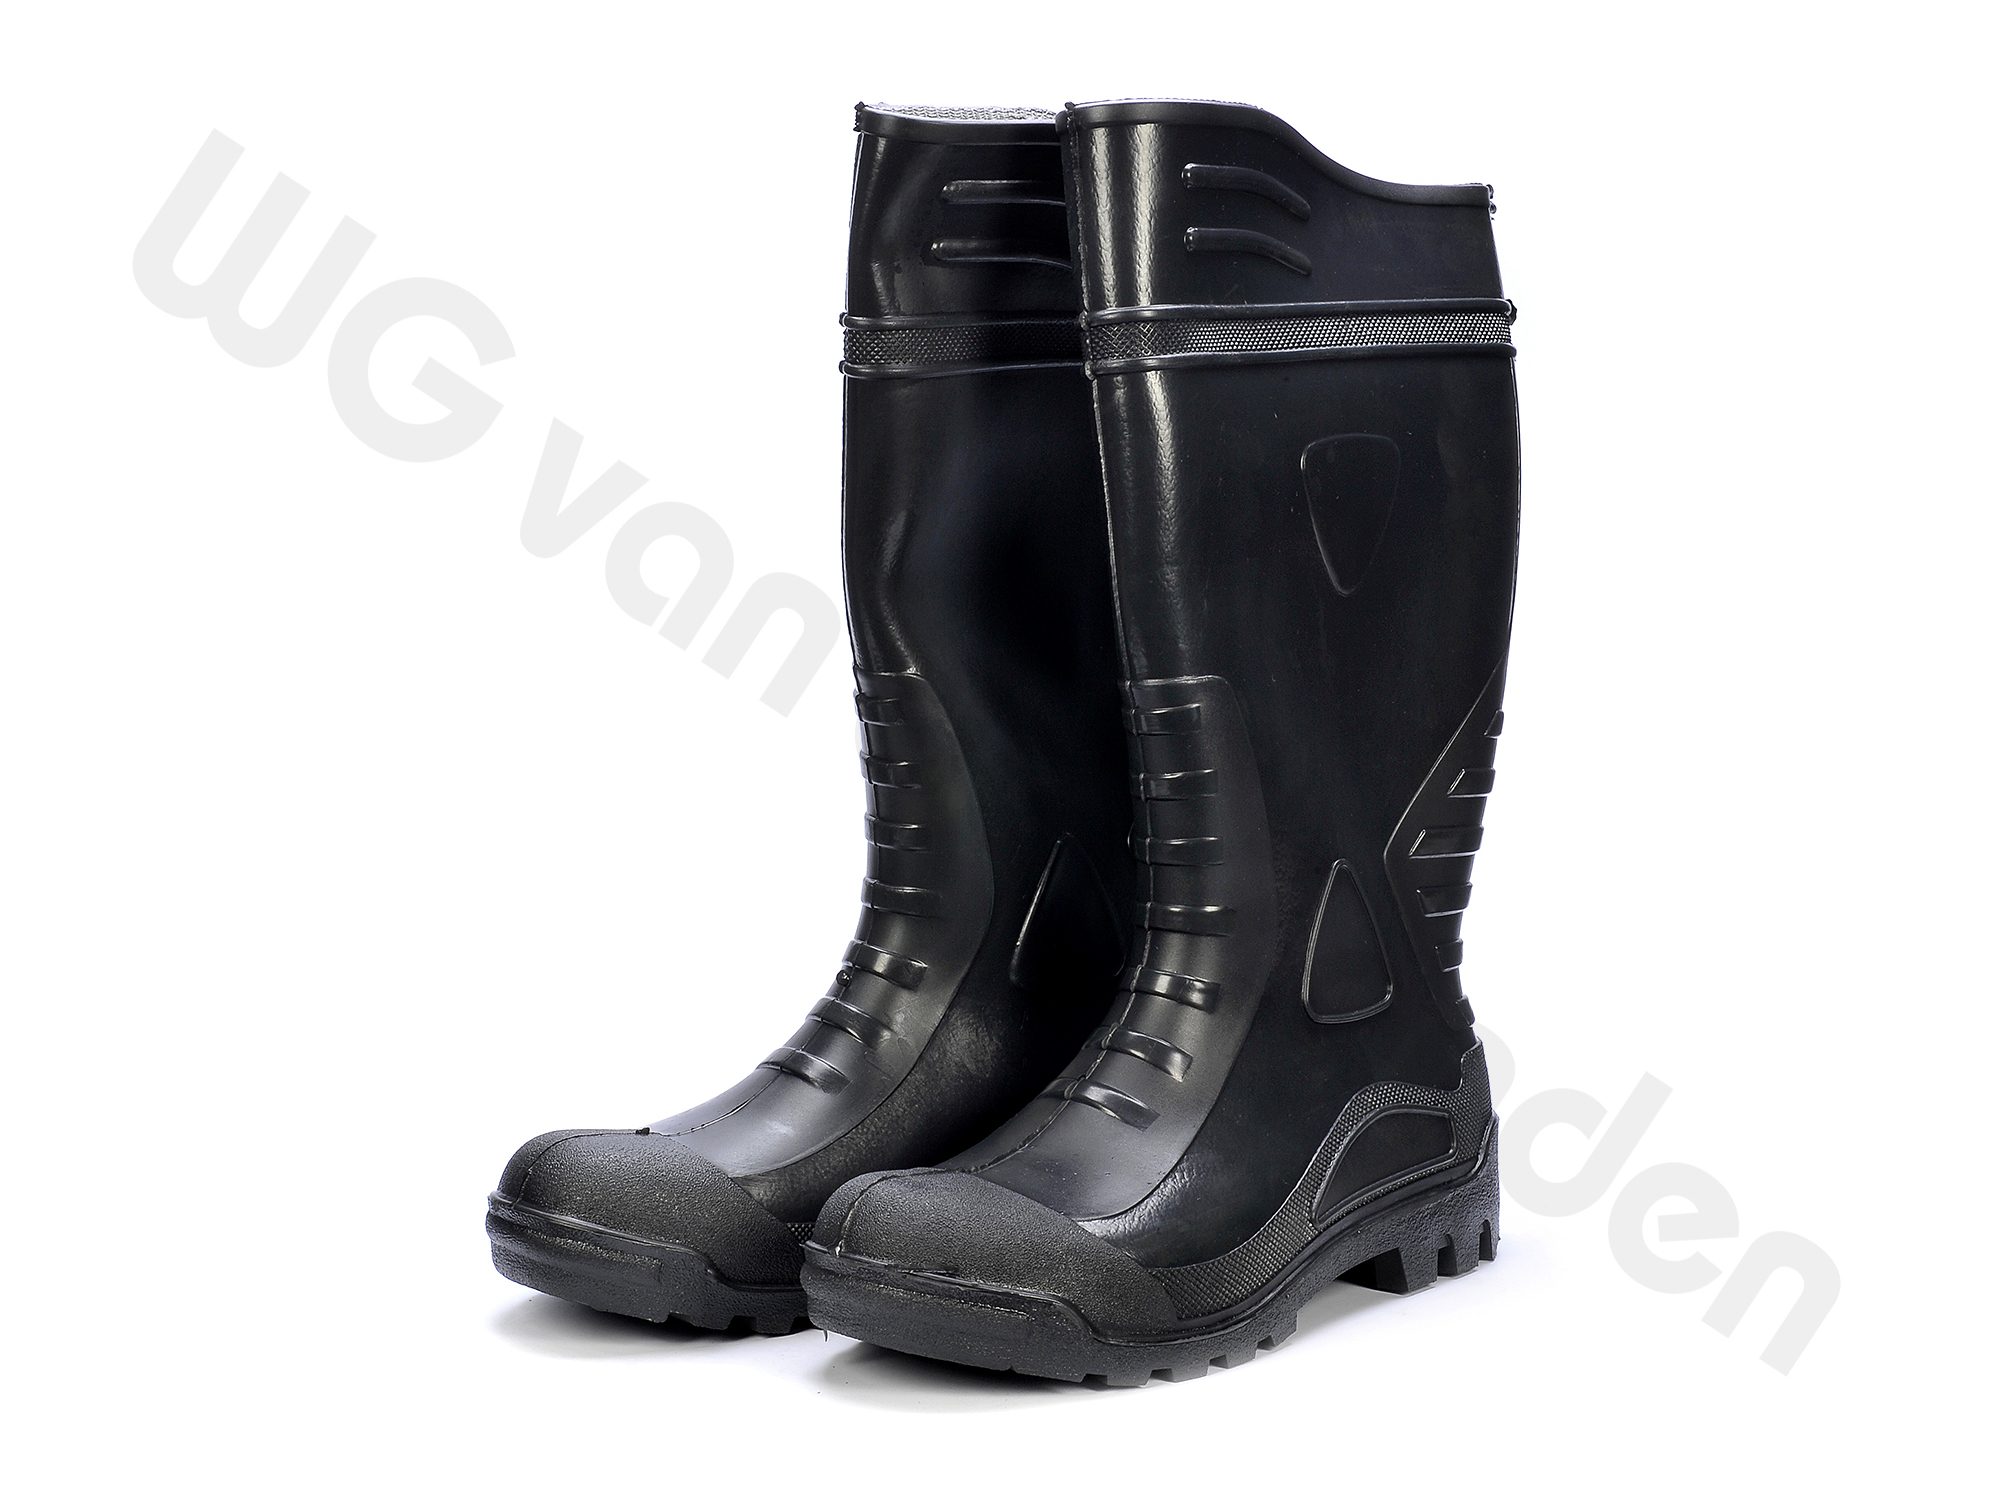 880210 BOOTS SAFETY S4 PVC WITH STEEL TOE SIZE 47/29.5CM CE